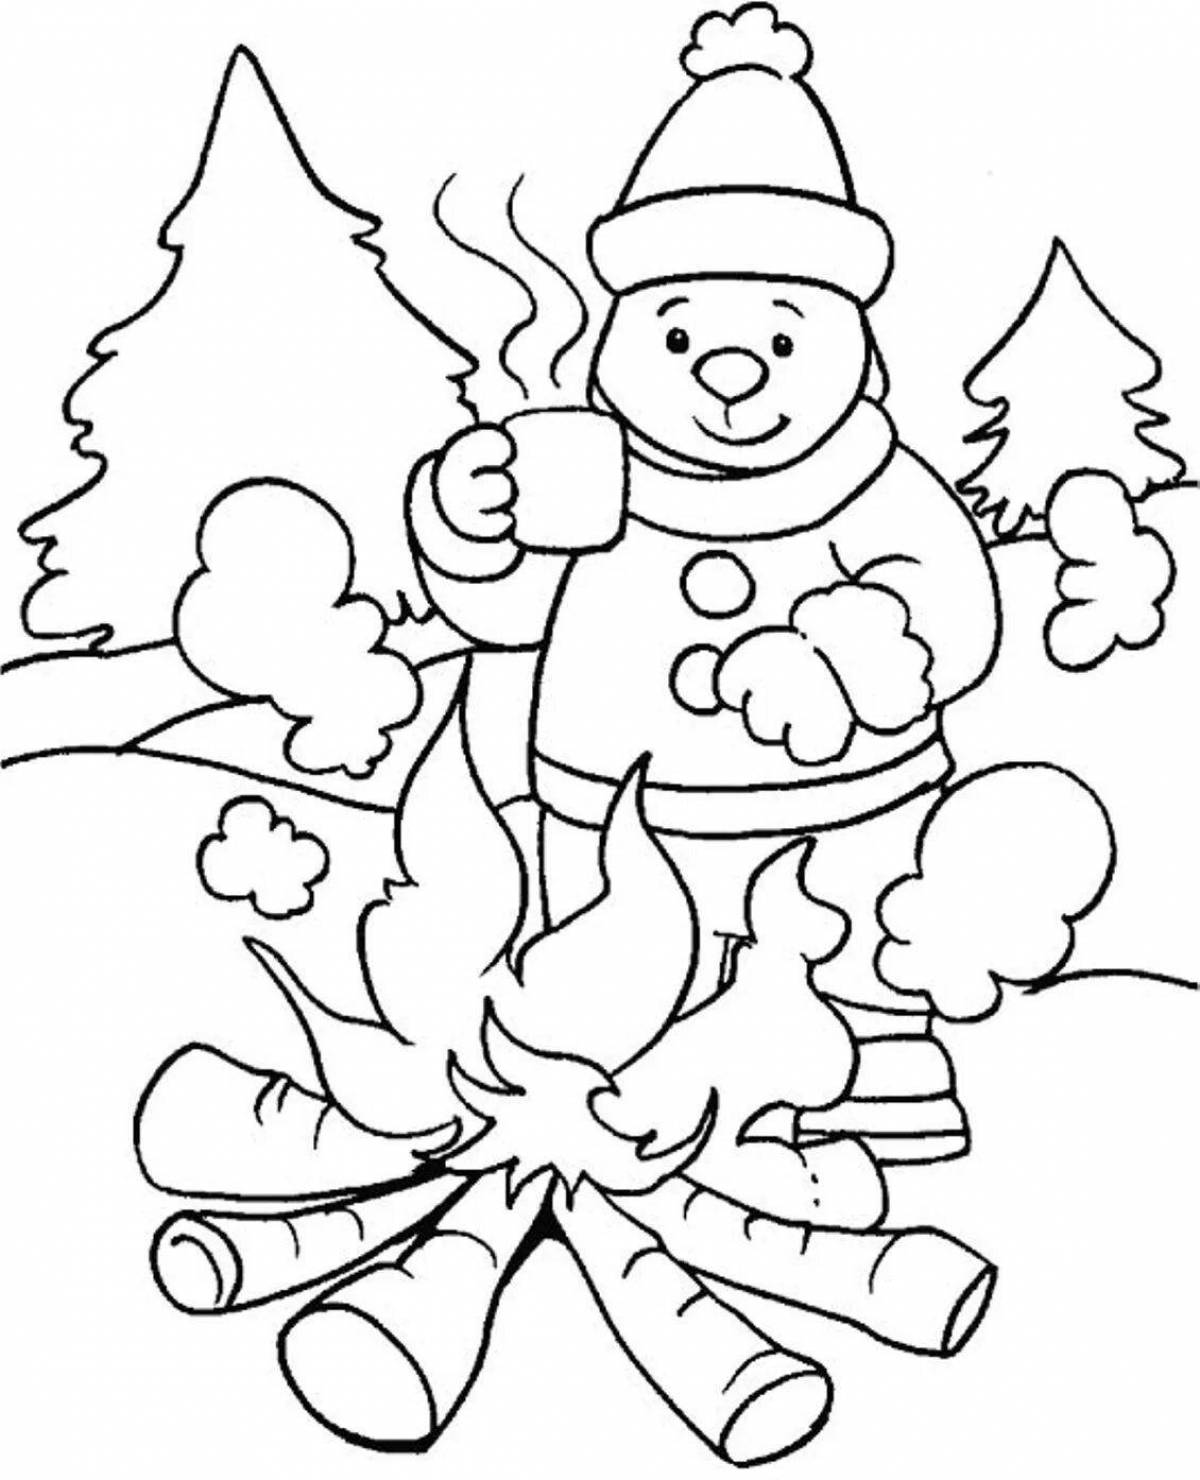 A fun winter coloring book for kids